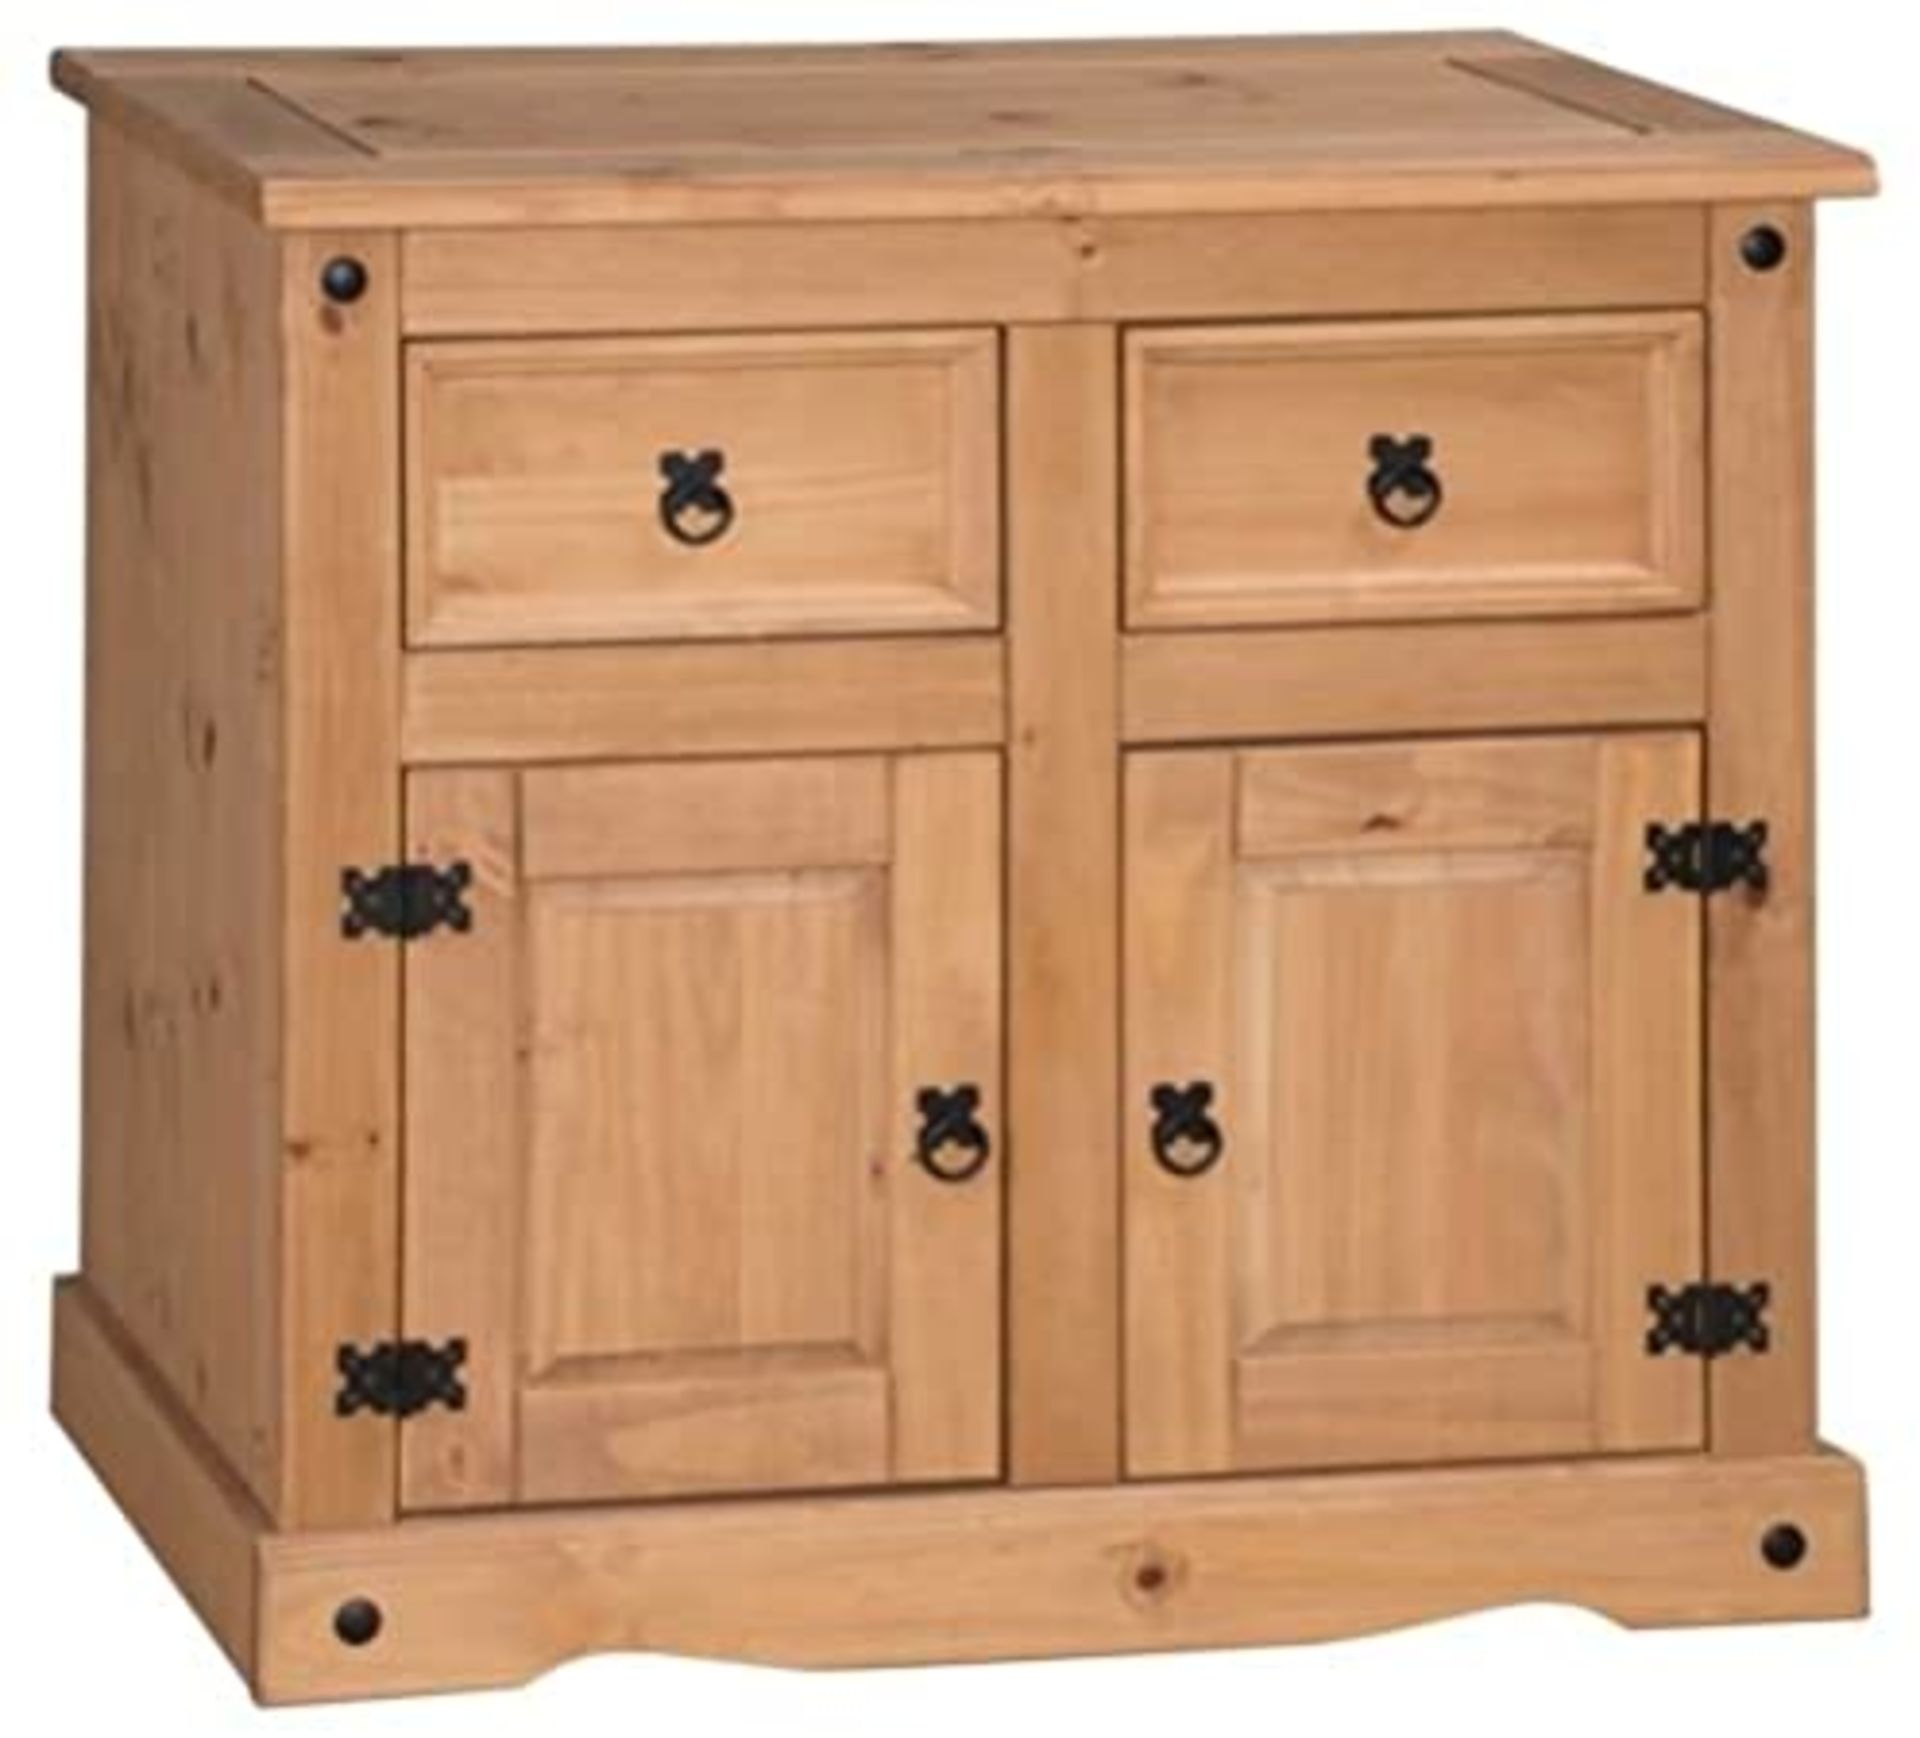 1 Pallet Of Raw Customer Returns (115226) - To Include: 1x Java 2 Drawer Bedside Table. 1x La...